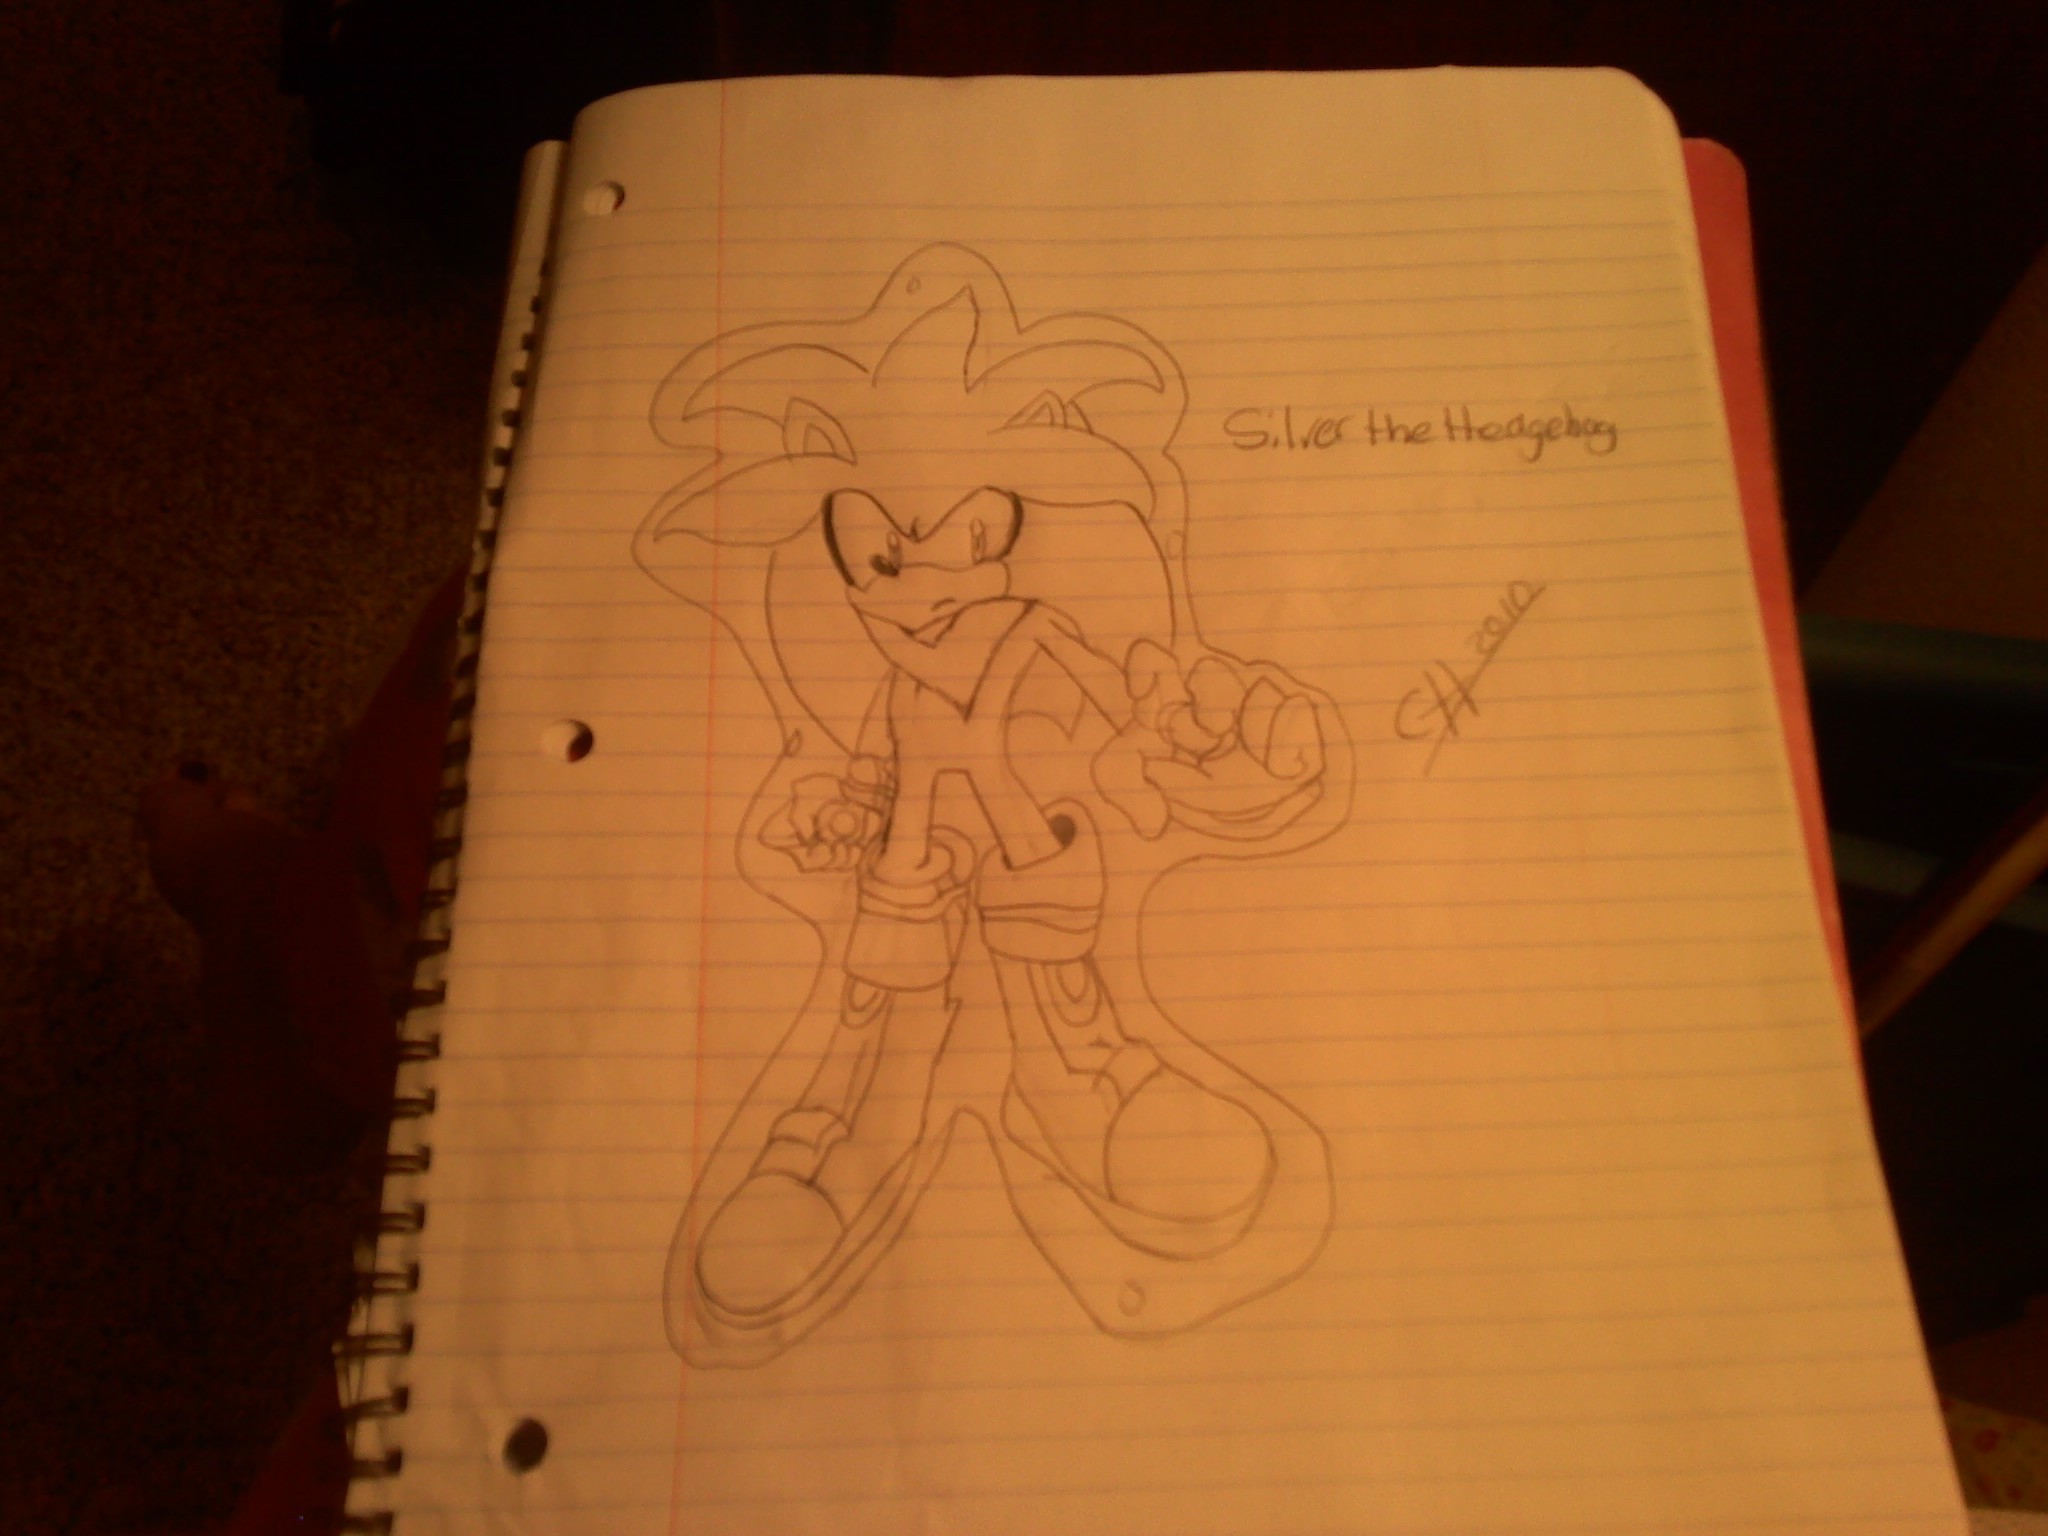 Silver the Hedgehog...not as good as I thought so..yeah